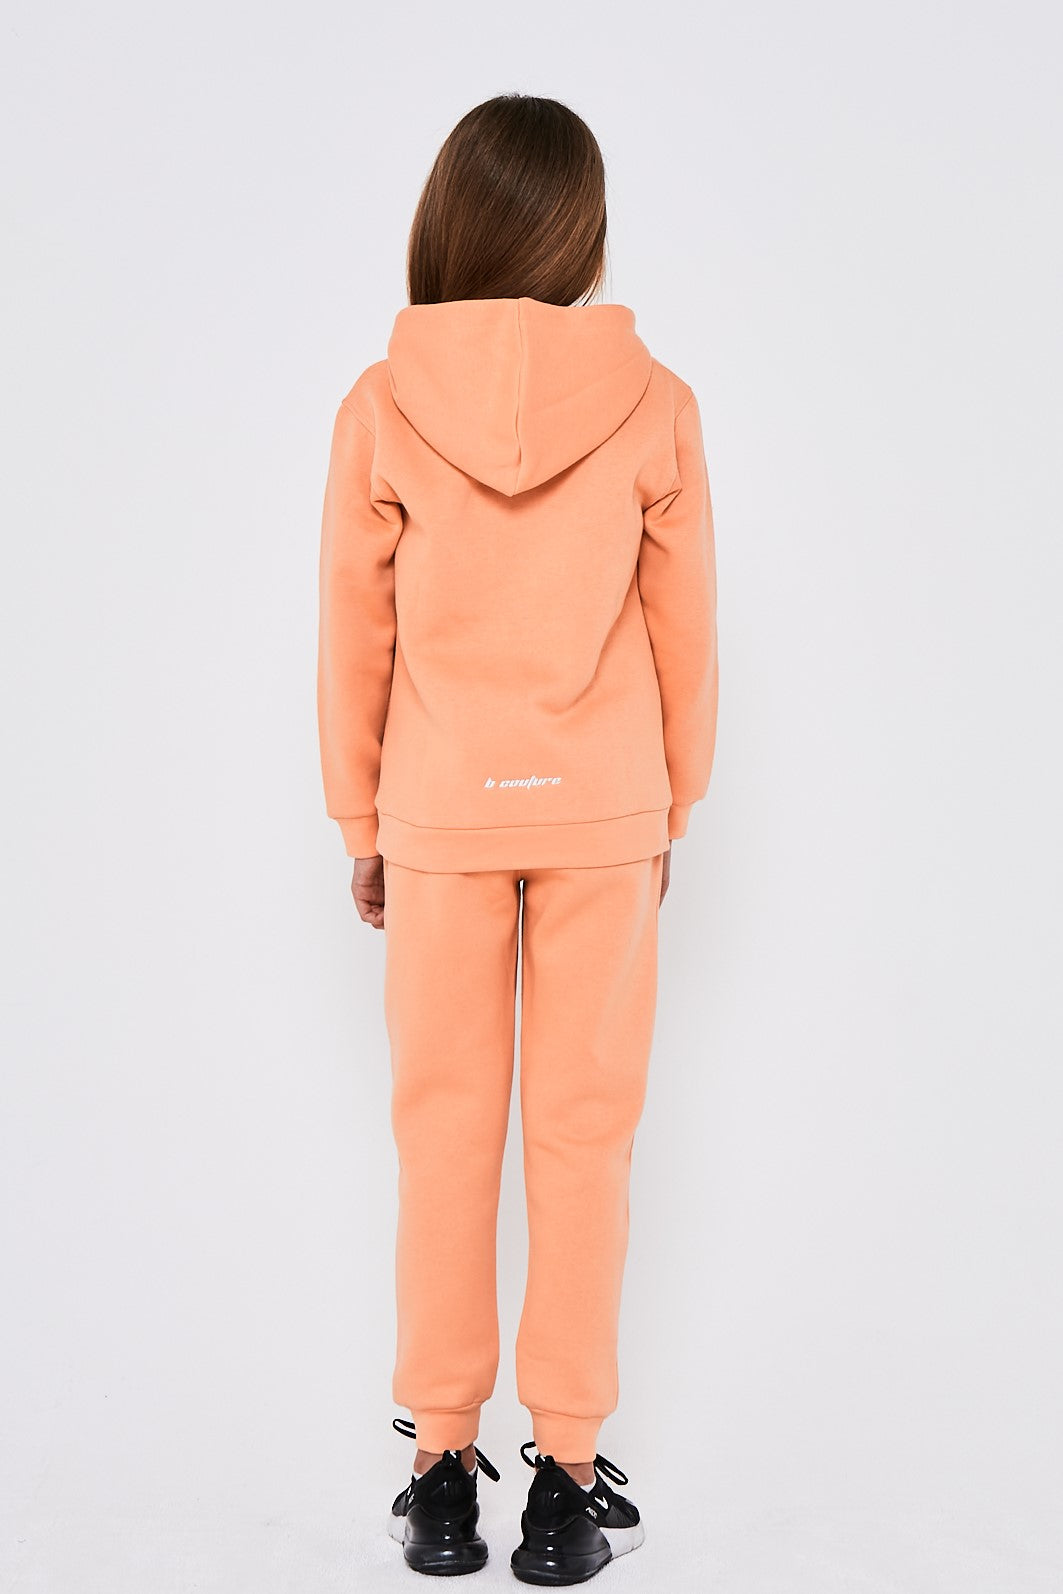 Limehouse Girls Tracksuit - Peach